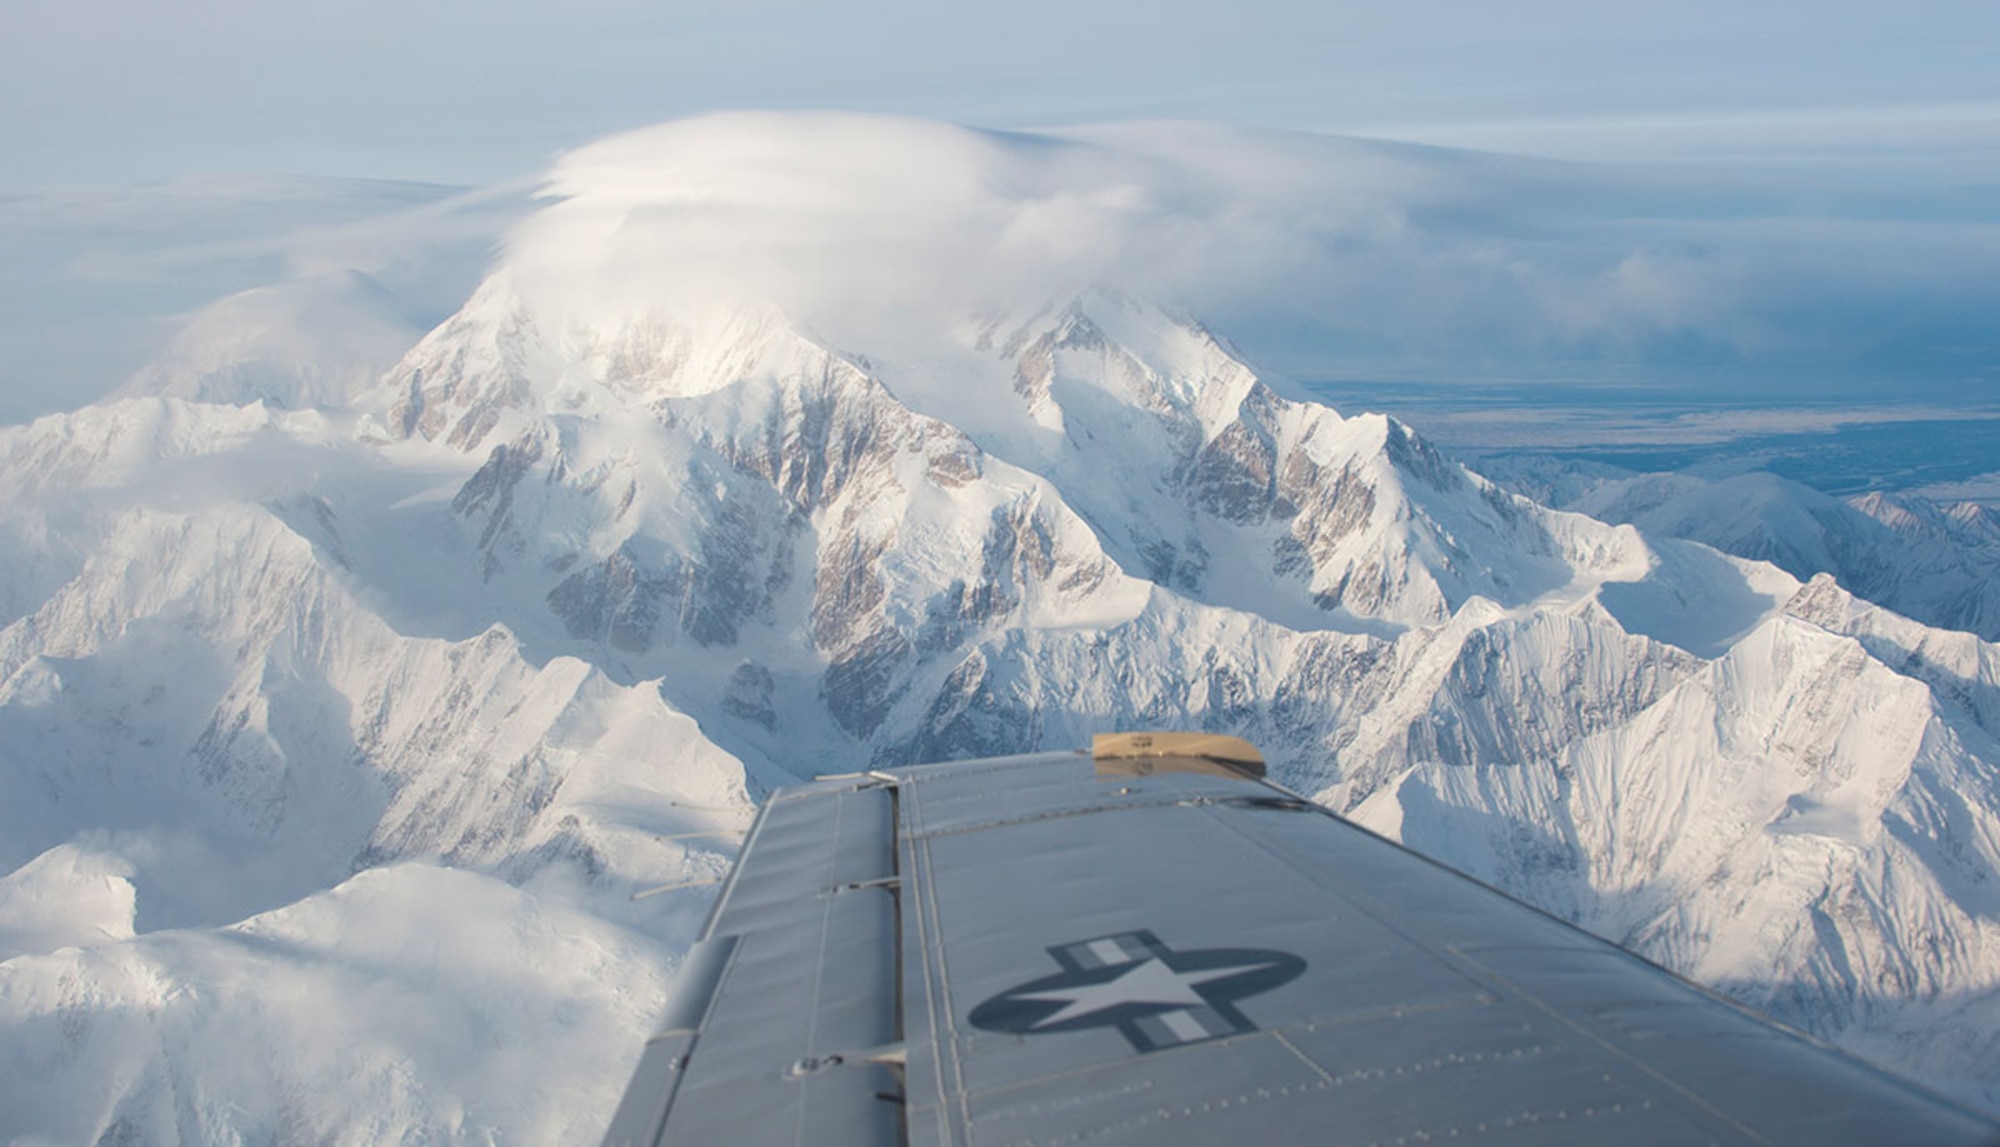 A C-12F Huron flies near Denali during a C-12 site pilot training mission visiting two remote locations in Alaska, Feb. 23, 2016. The pilots have to complete training which includes about 30 hours of flying, landing, training, and instructor-supervised landing at each of the seven remote long-range radar sites. The Huron is assigned to the 517th Airlift Squadron at Joint Base Elmendorf-Richardson, Alaska. (U.S. Air Force photo/Staff Sgt. Sheila deVera)